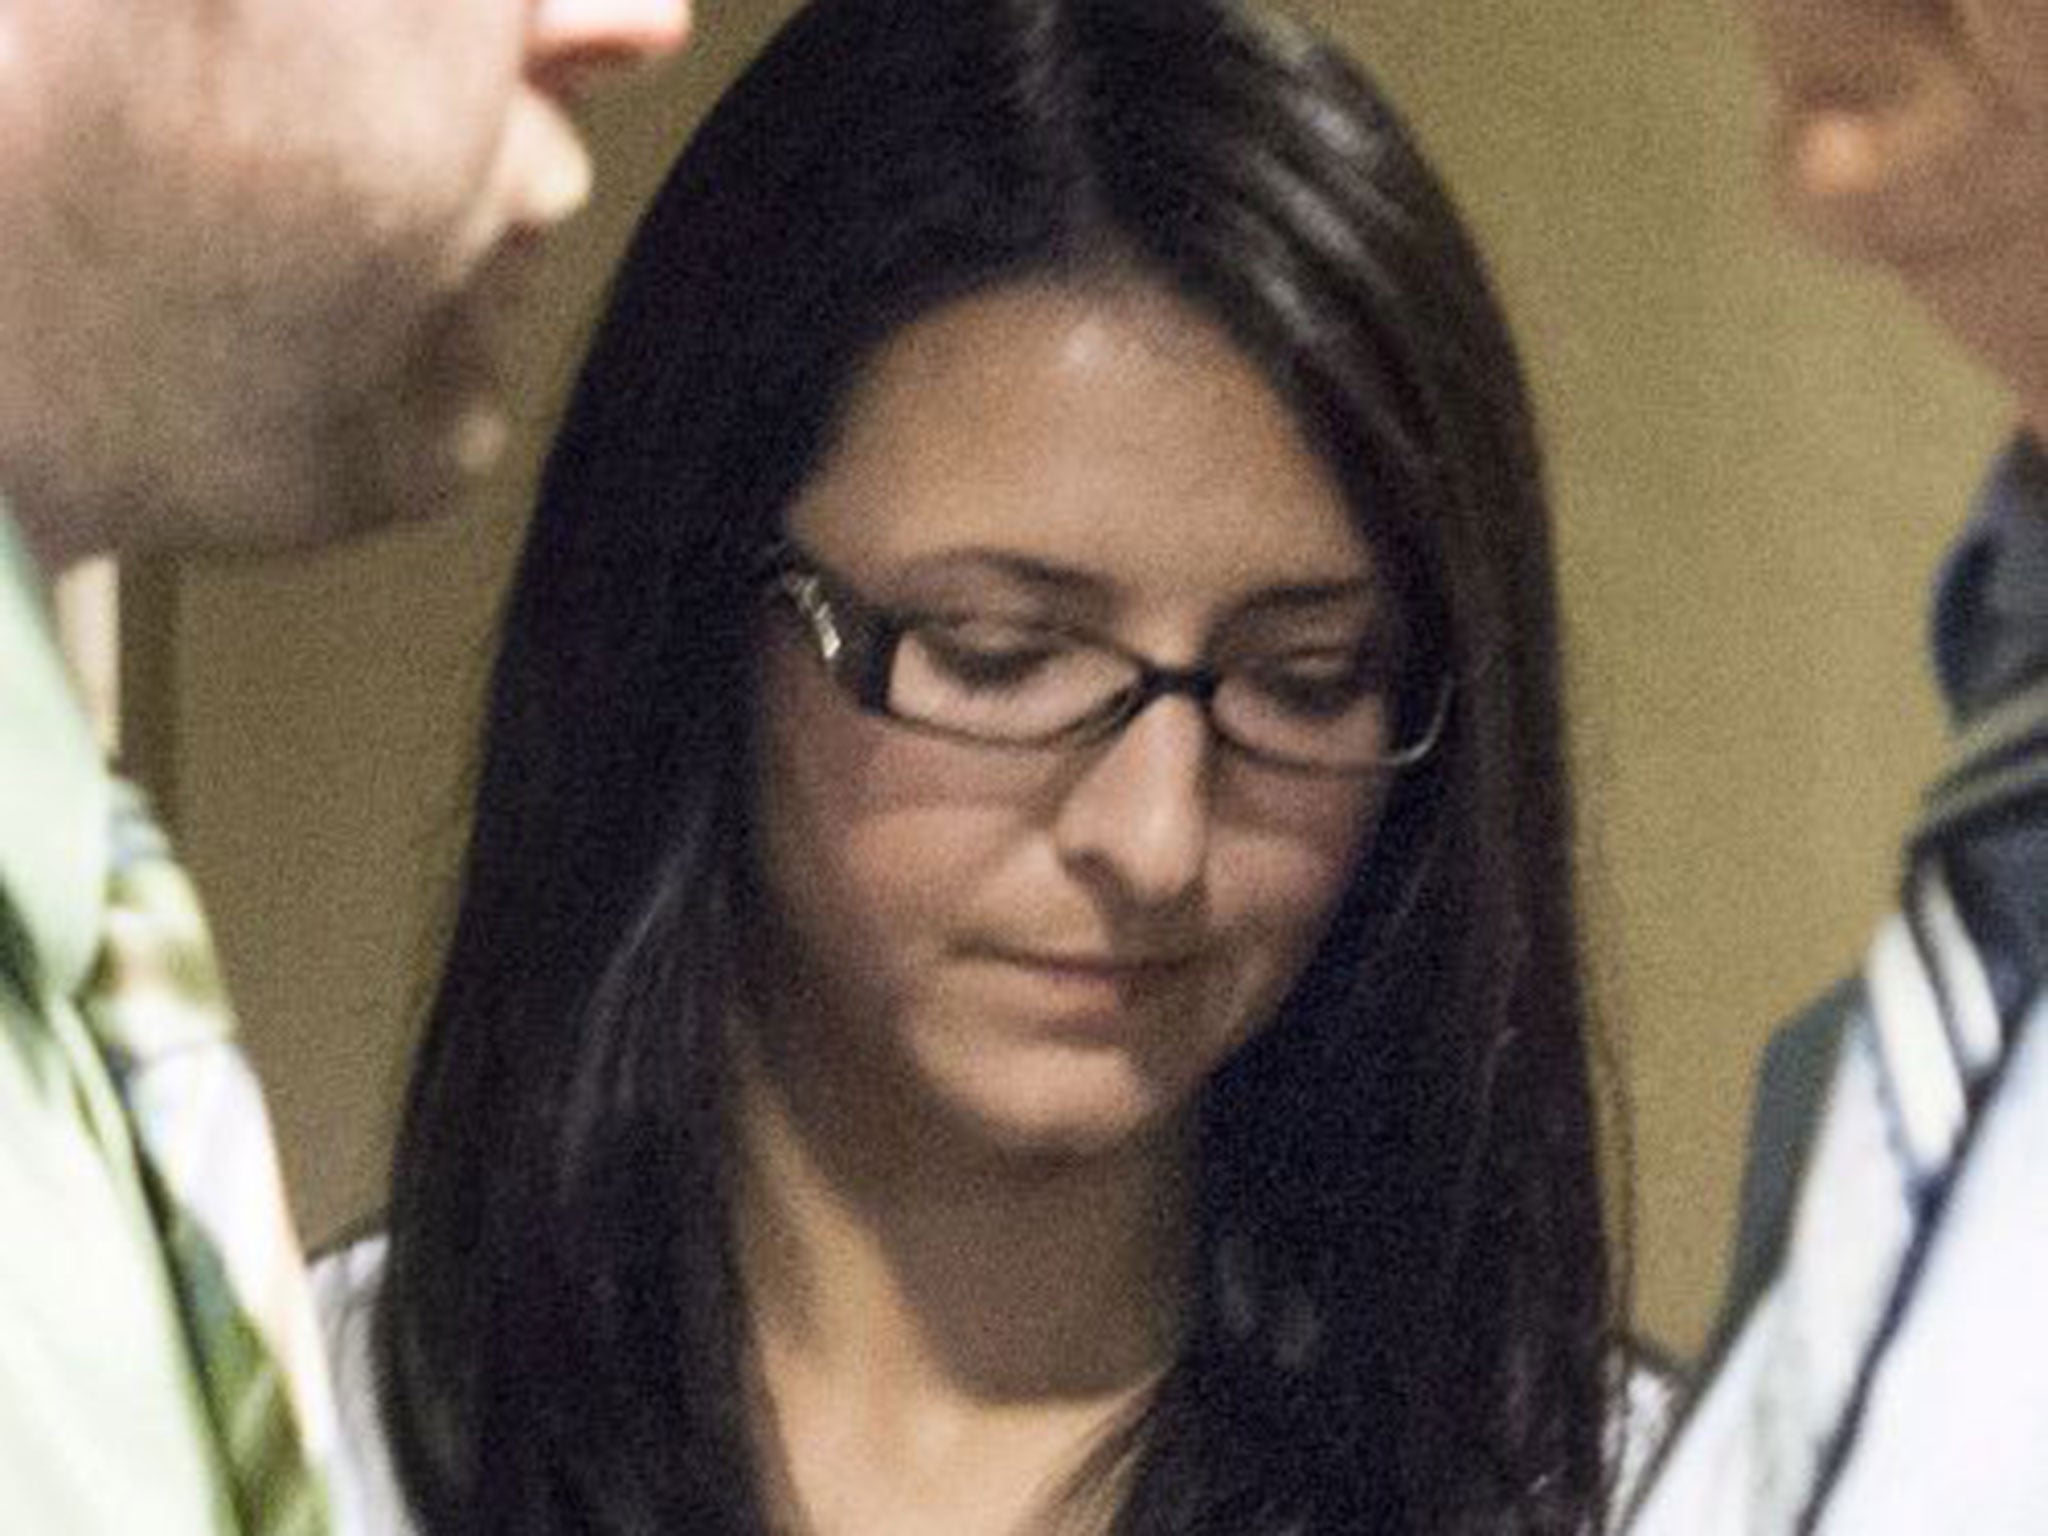 Emma Czornobaj, 25, was also given 240 hours community service and a 10-year driving ban